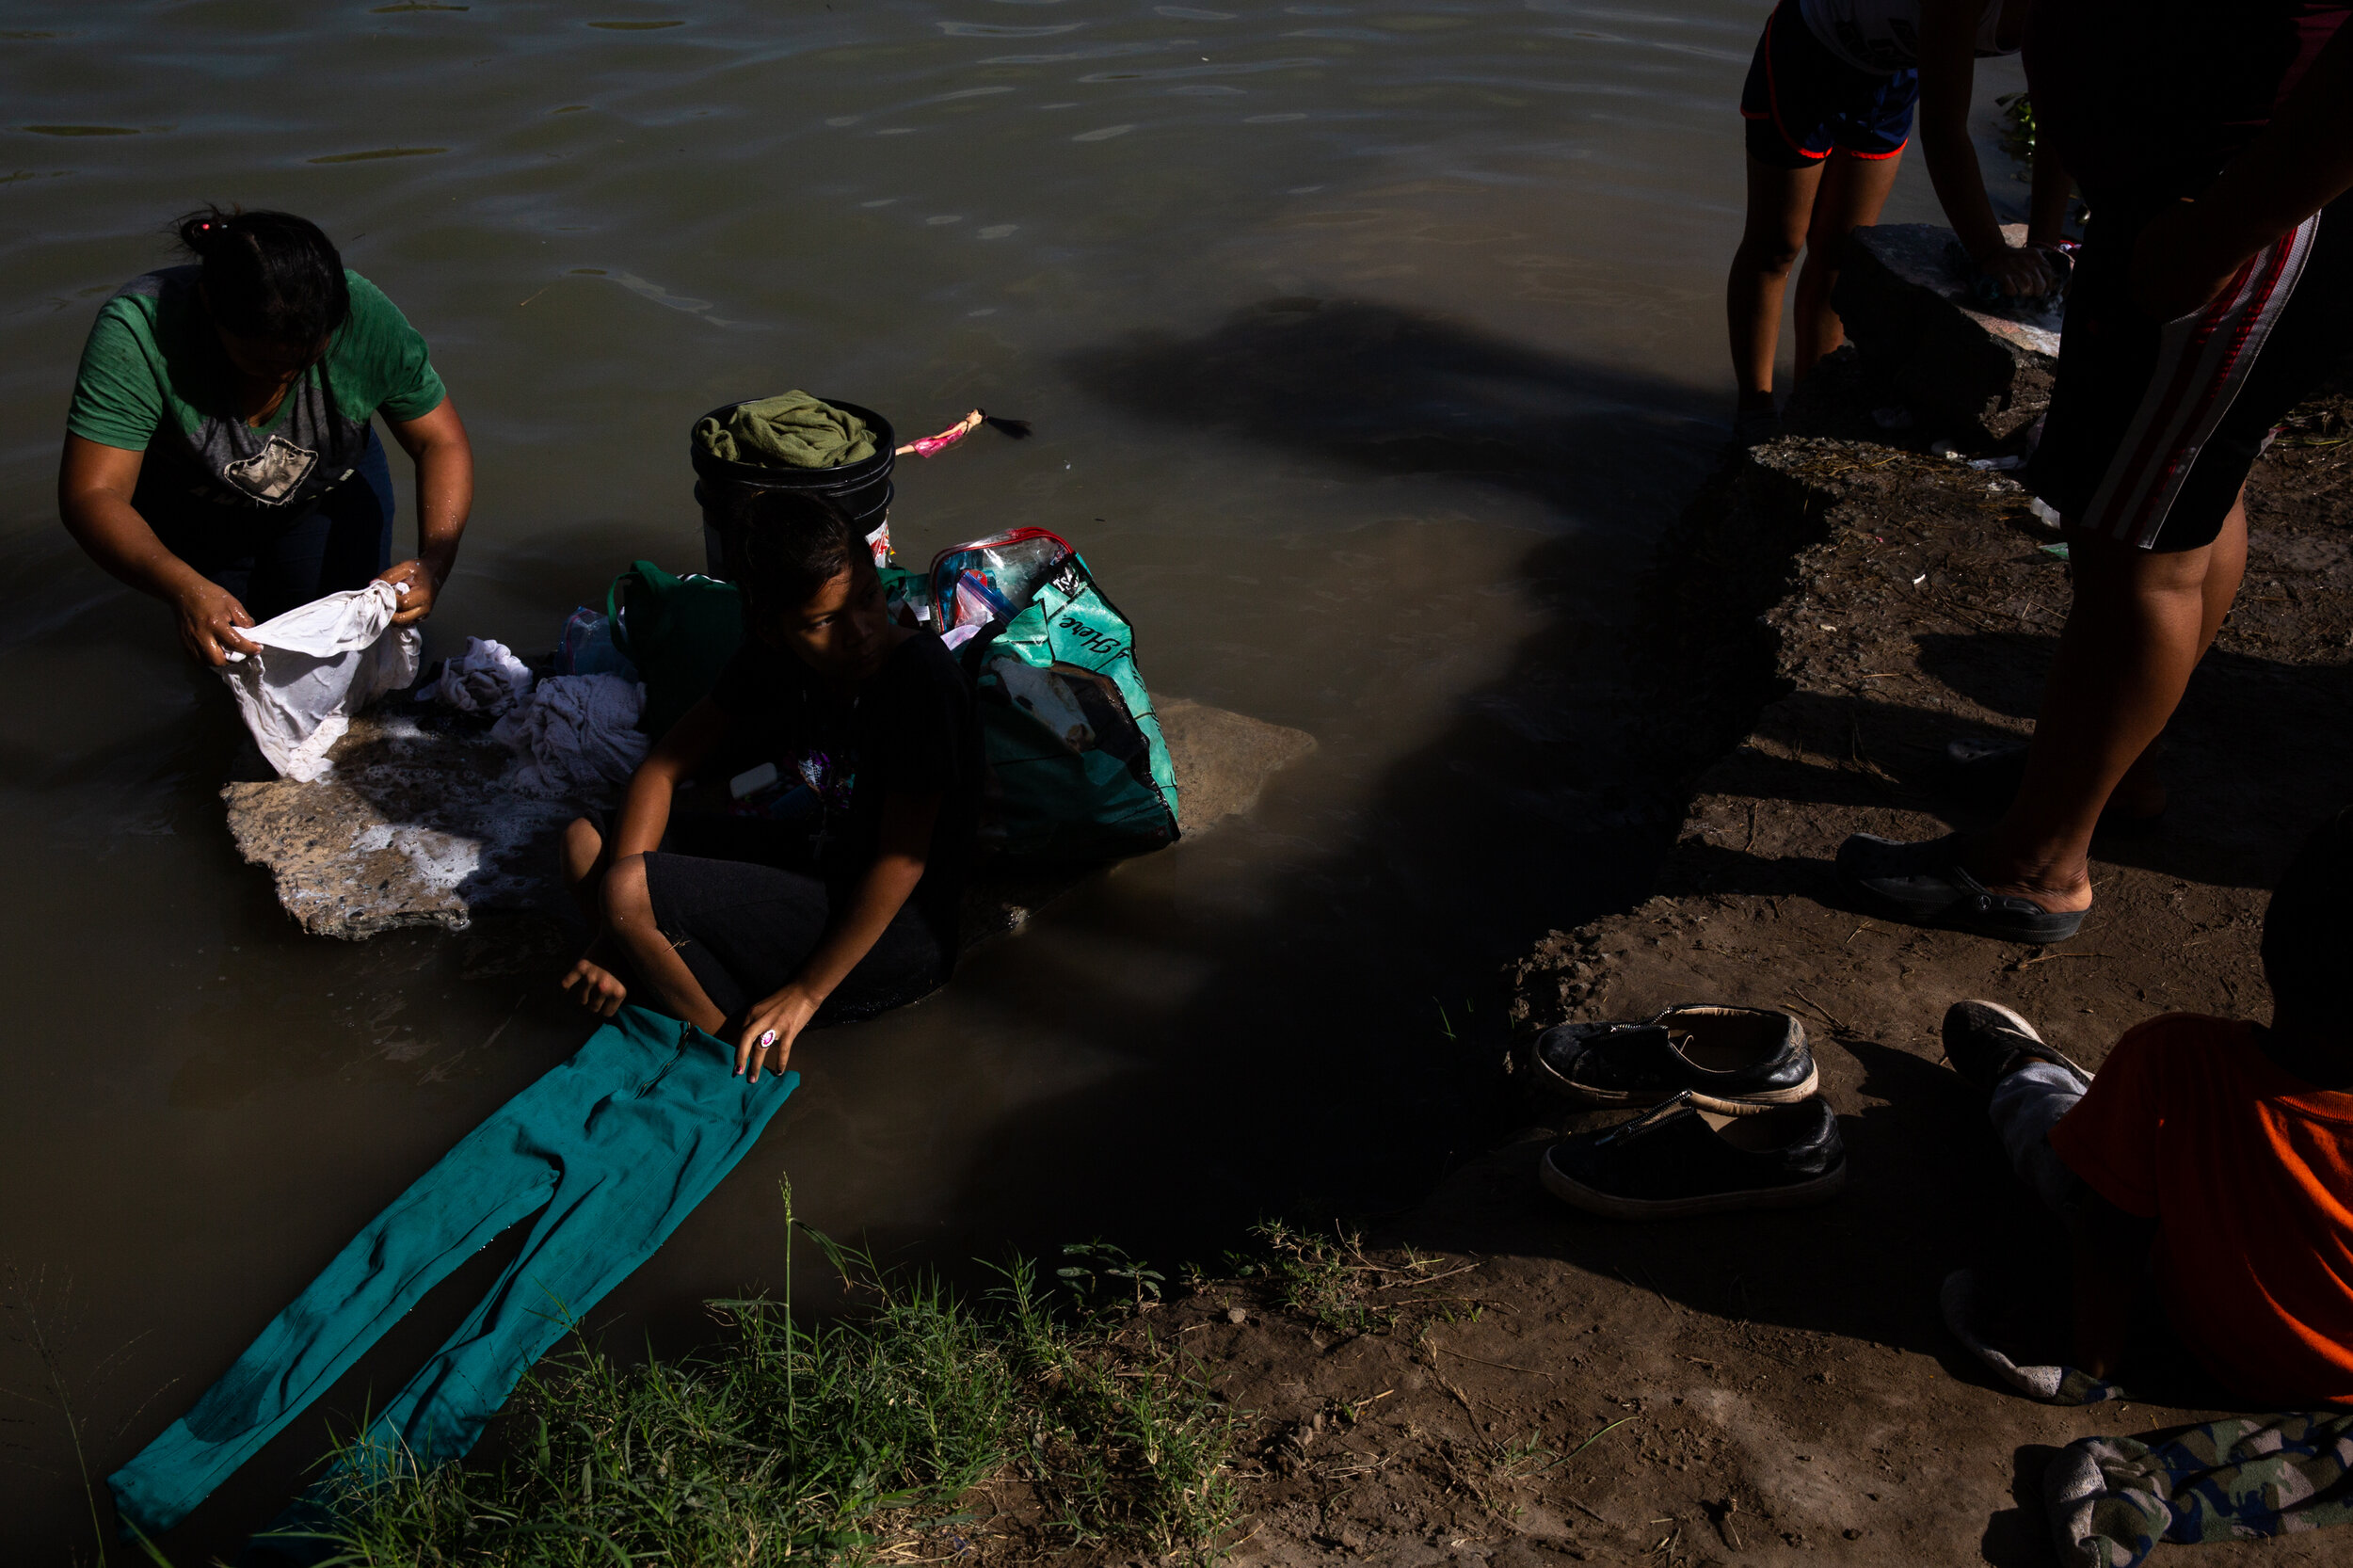  Migrant women from the Matamoros encampment wait in line to wash clothes by the banks of the Rio Grande on Jan. 14, 2020.  